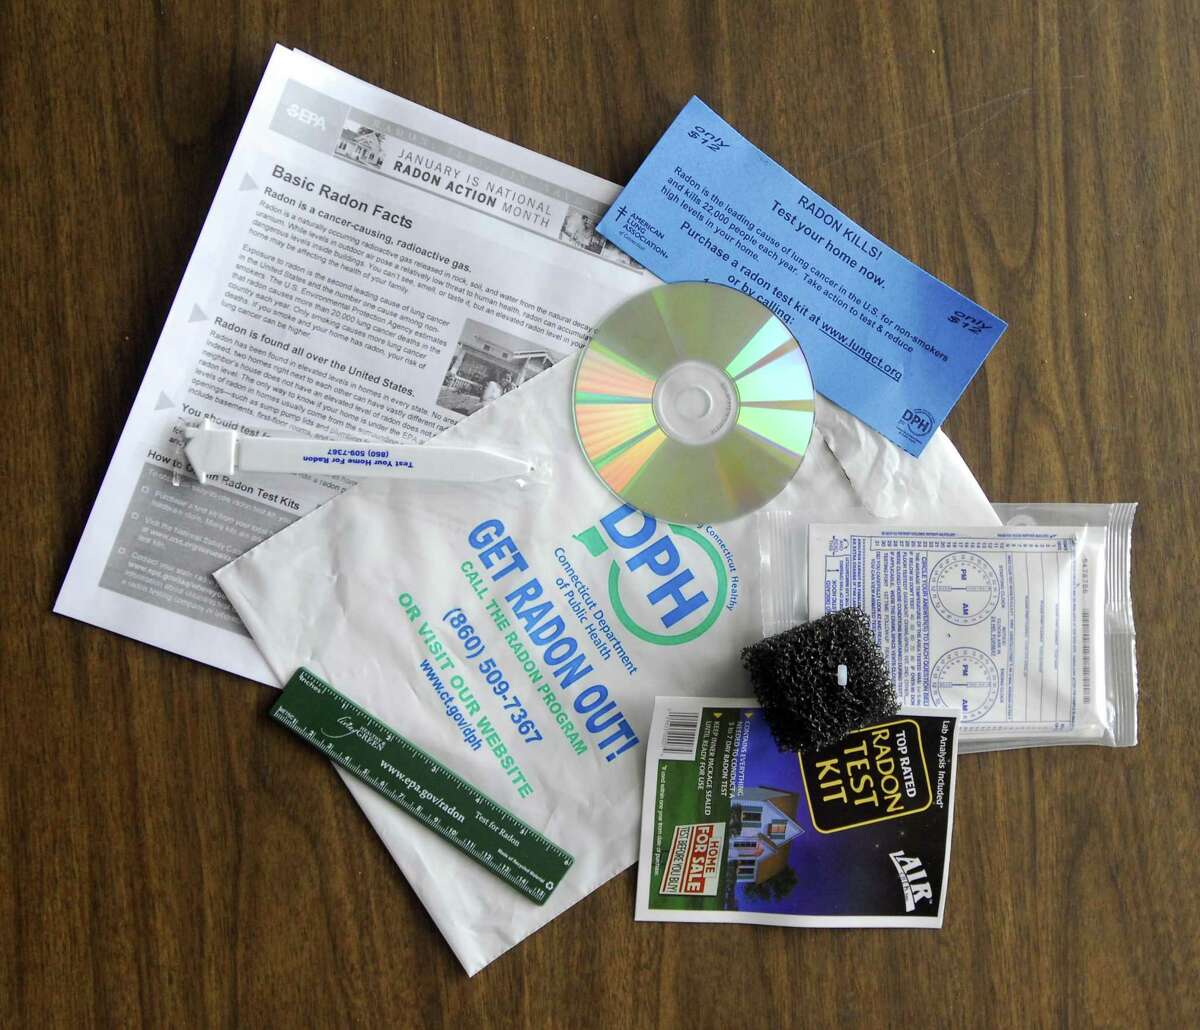 A radon home test kit is shown. The Naugatuck Valley Health District, which includes Shelton, the Connecticut Department of Public Health, the American Lung Association of Connecticut, and the U.S. Environmental Protection Agency urge all residents to test their homes for radon gas, and, if necessary, mitigate high levels when they are found in the abodes.